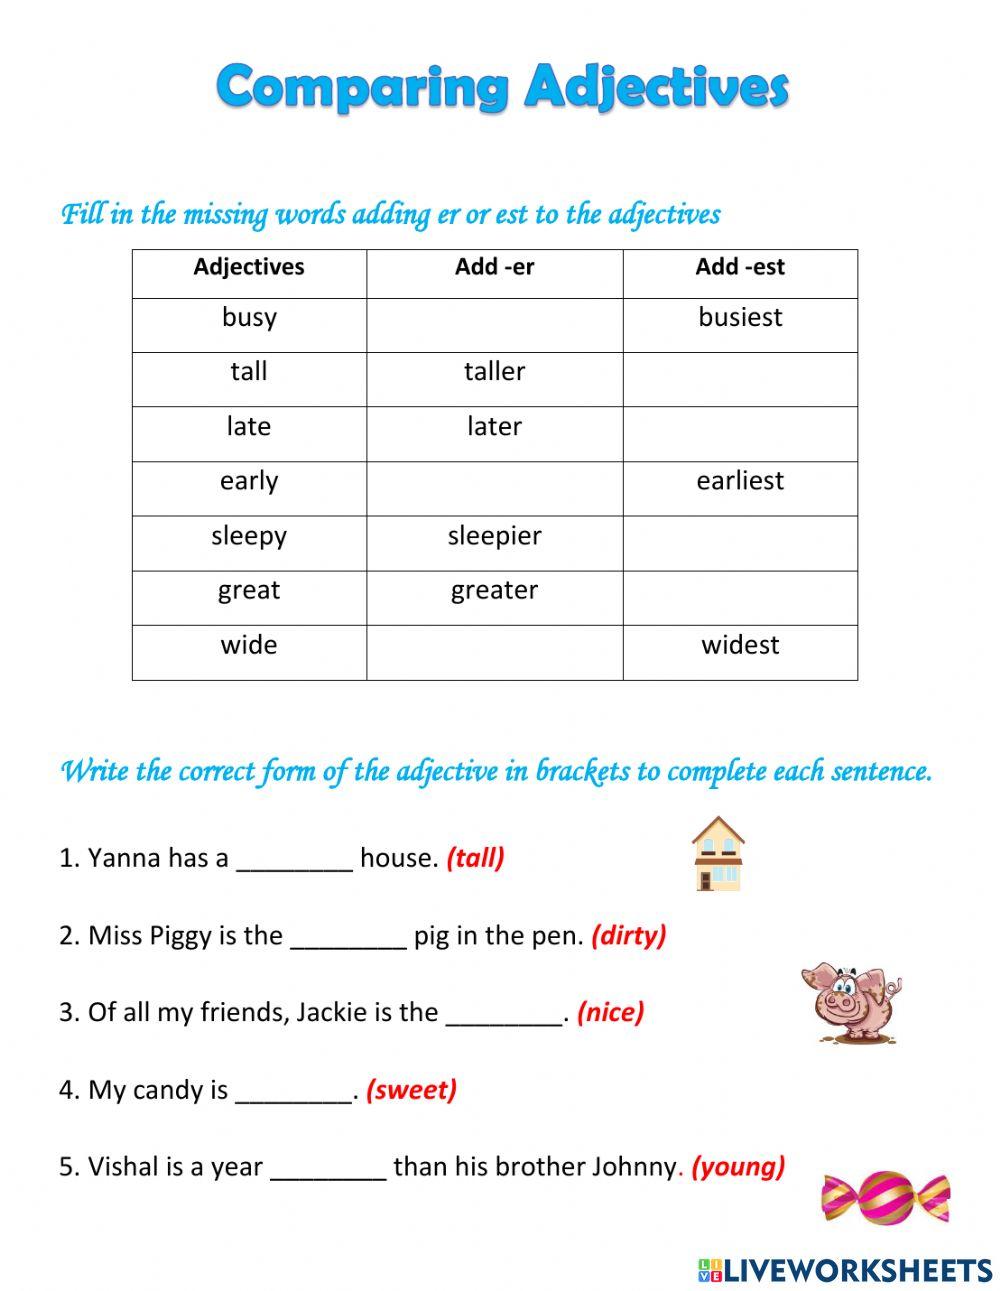 Comparing Adjectives